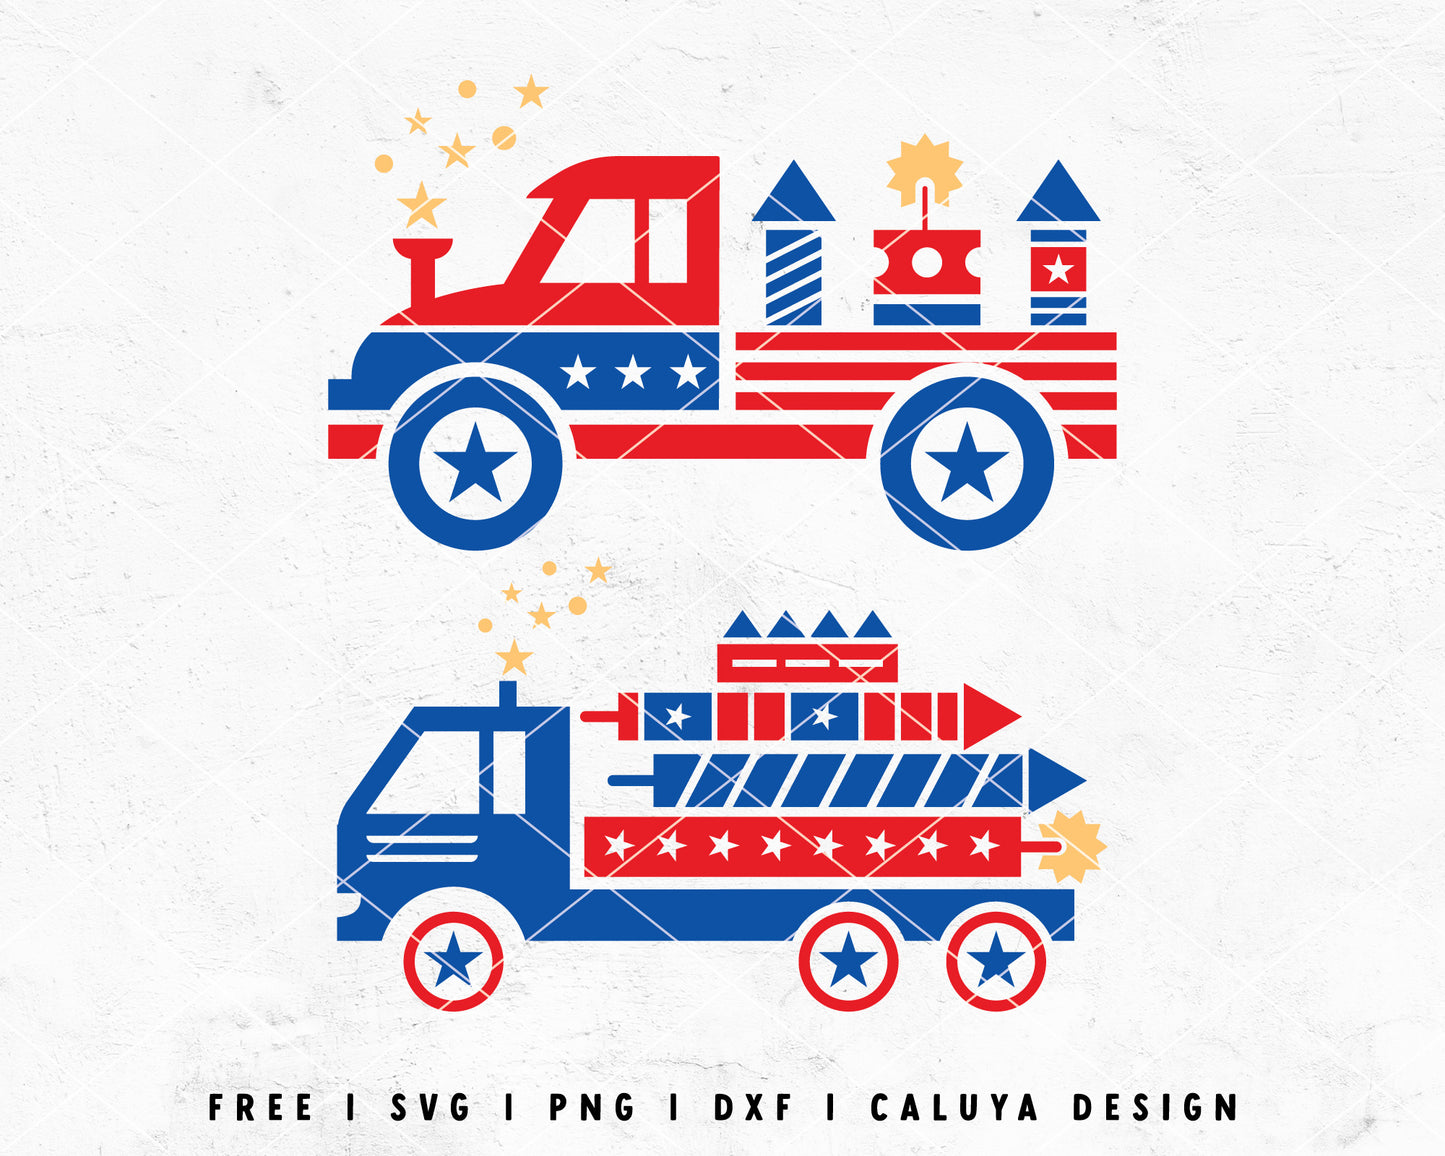 FREE July 4th SVG | Truck SVG | Firework SVG  Cut File for Cricut, Cameo Silhouette | Free SVG Cut File